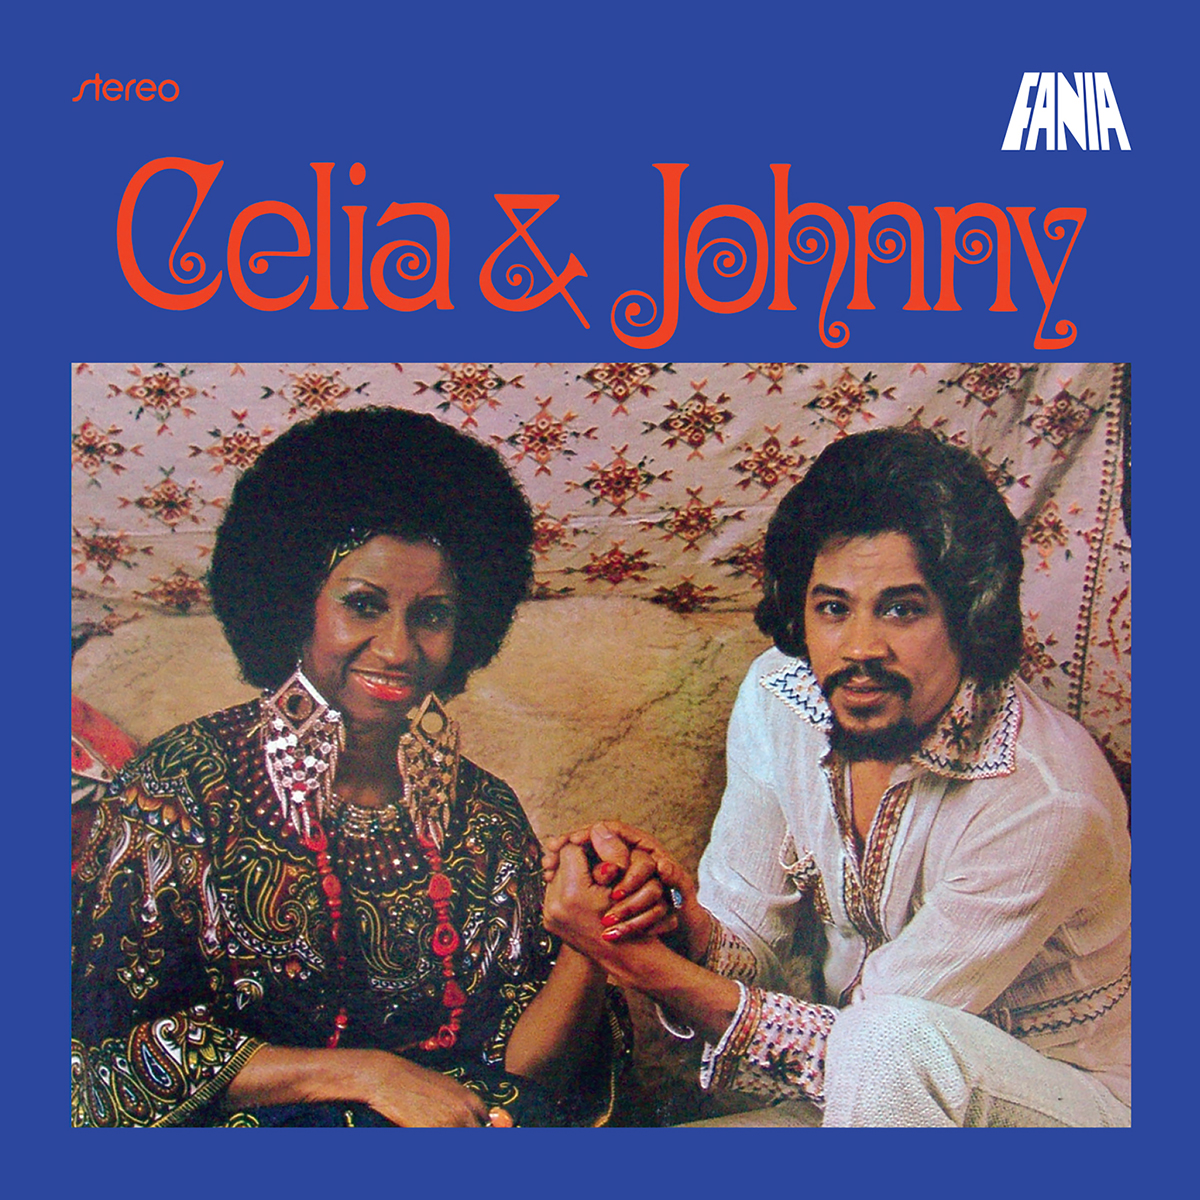 Featured Image for “CELIA & JOHNNY”